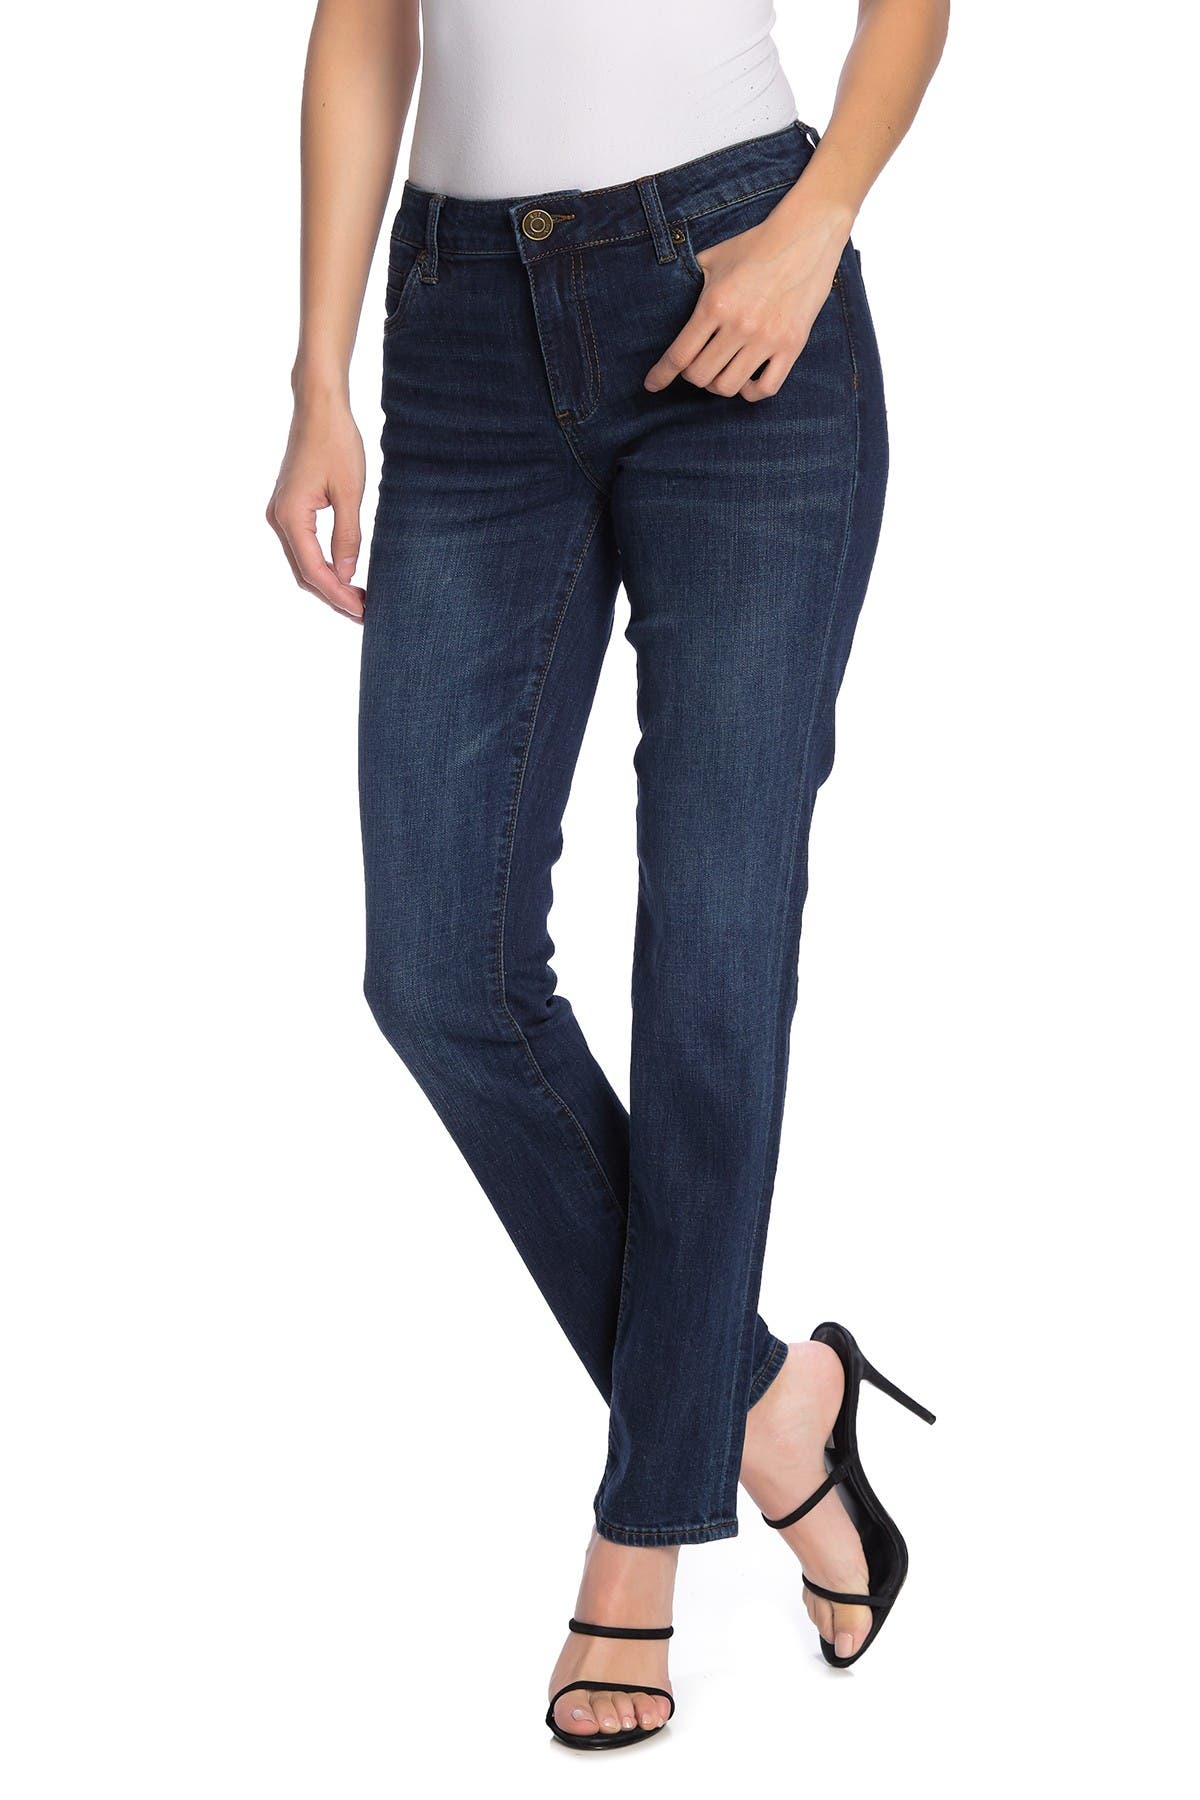 kut from the kloth jeans nordstrom